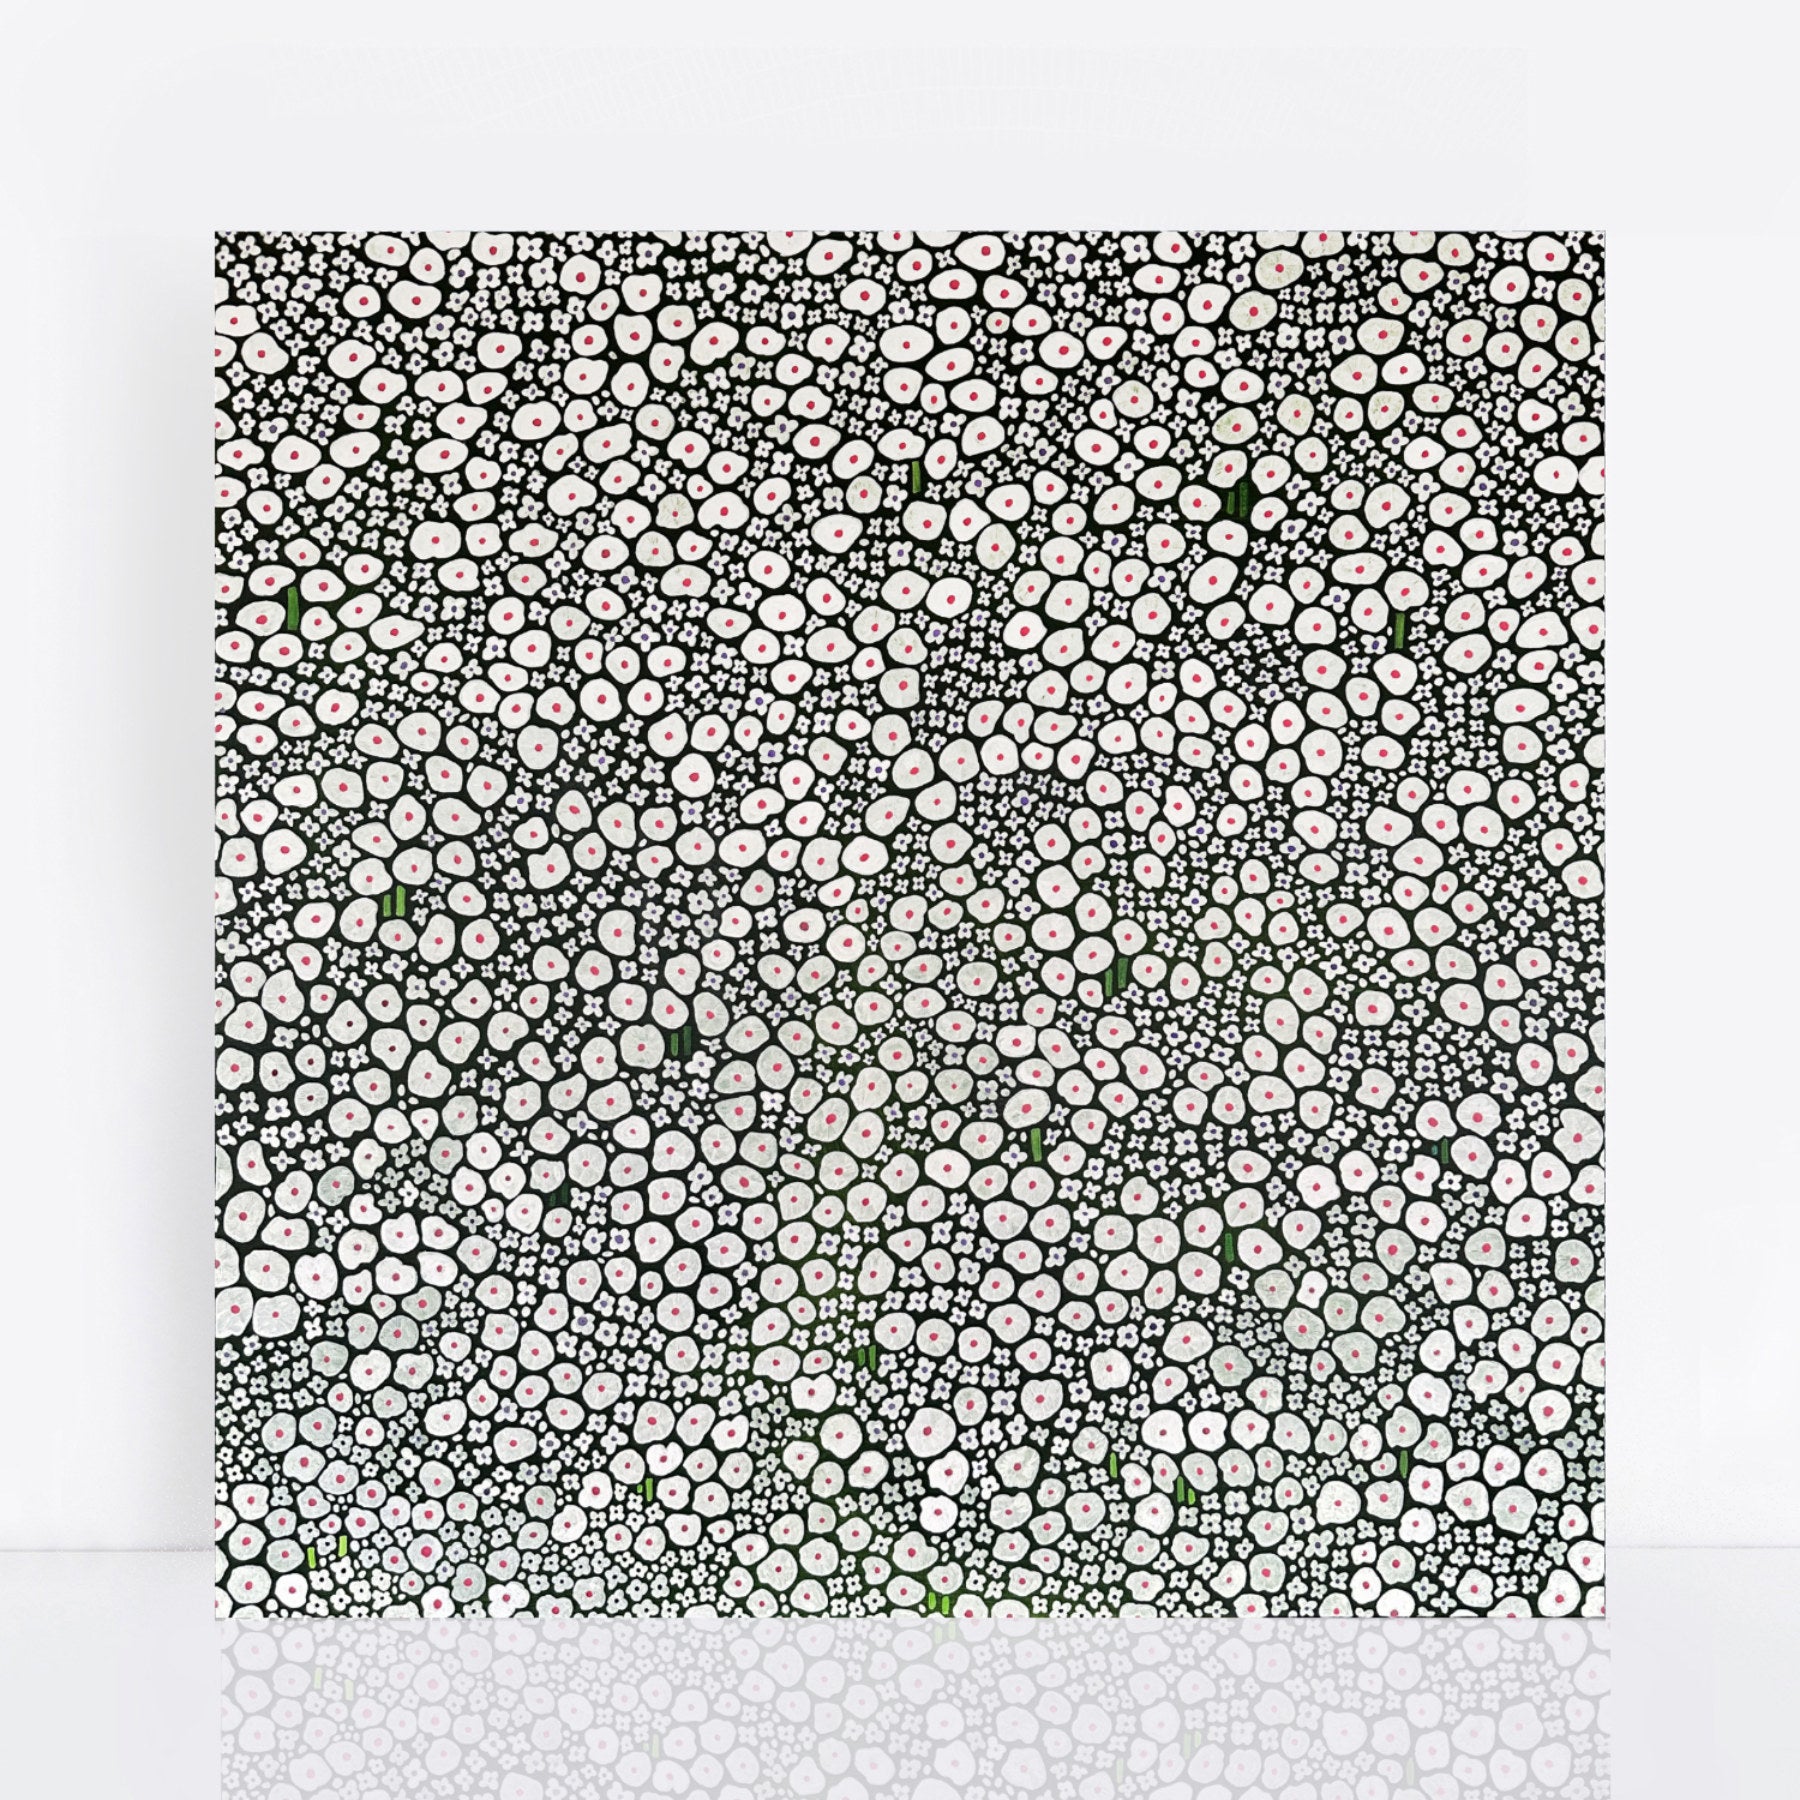 large abstract painting covered in white flower blossoms filling the entire canvas